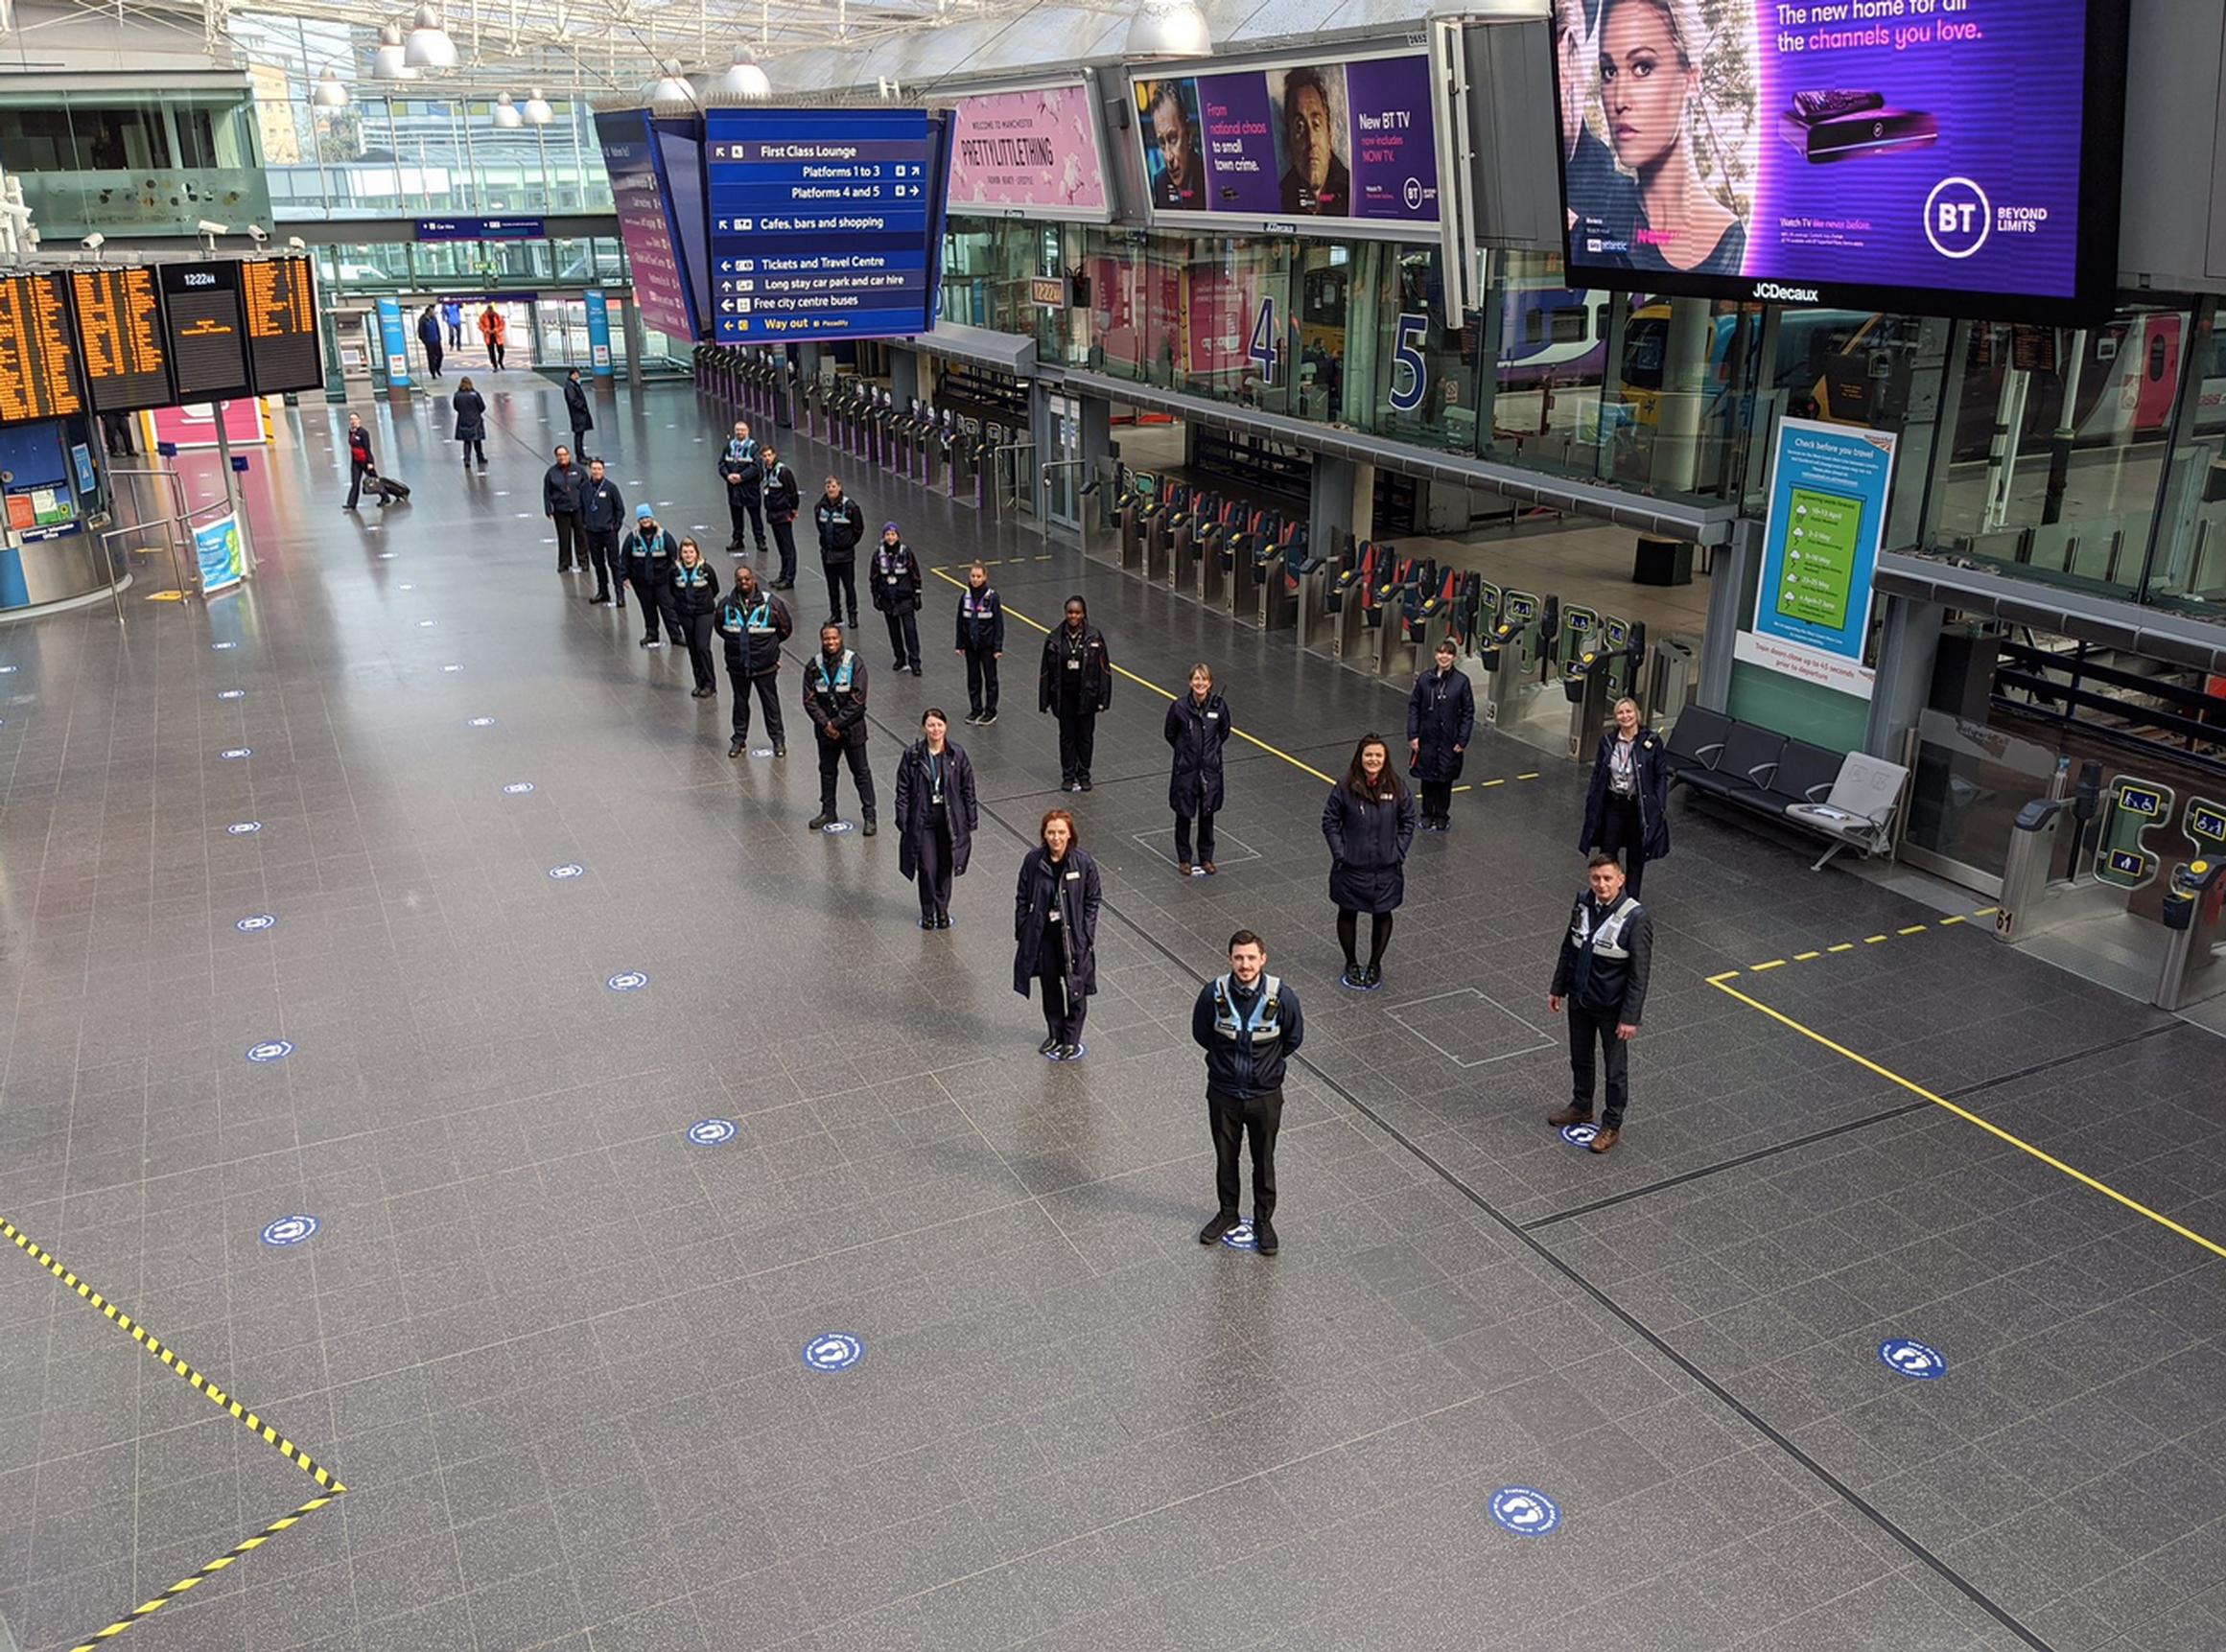 Staff prepare for work at Manchester Piccadilly